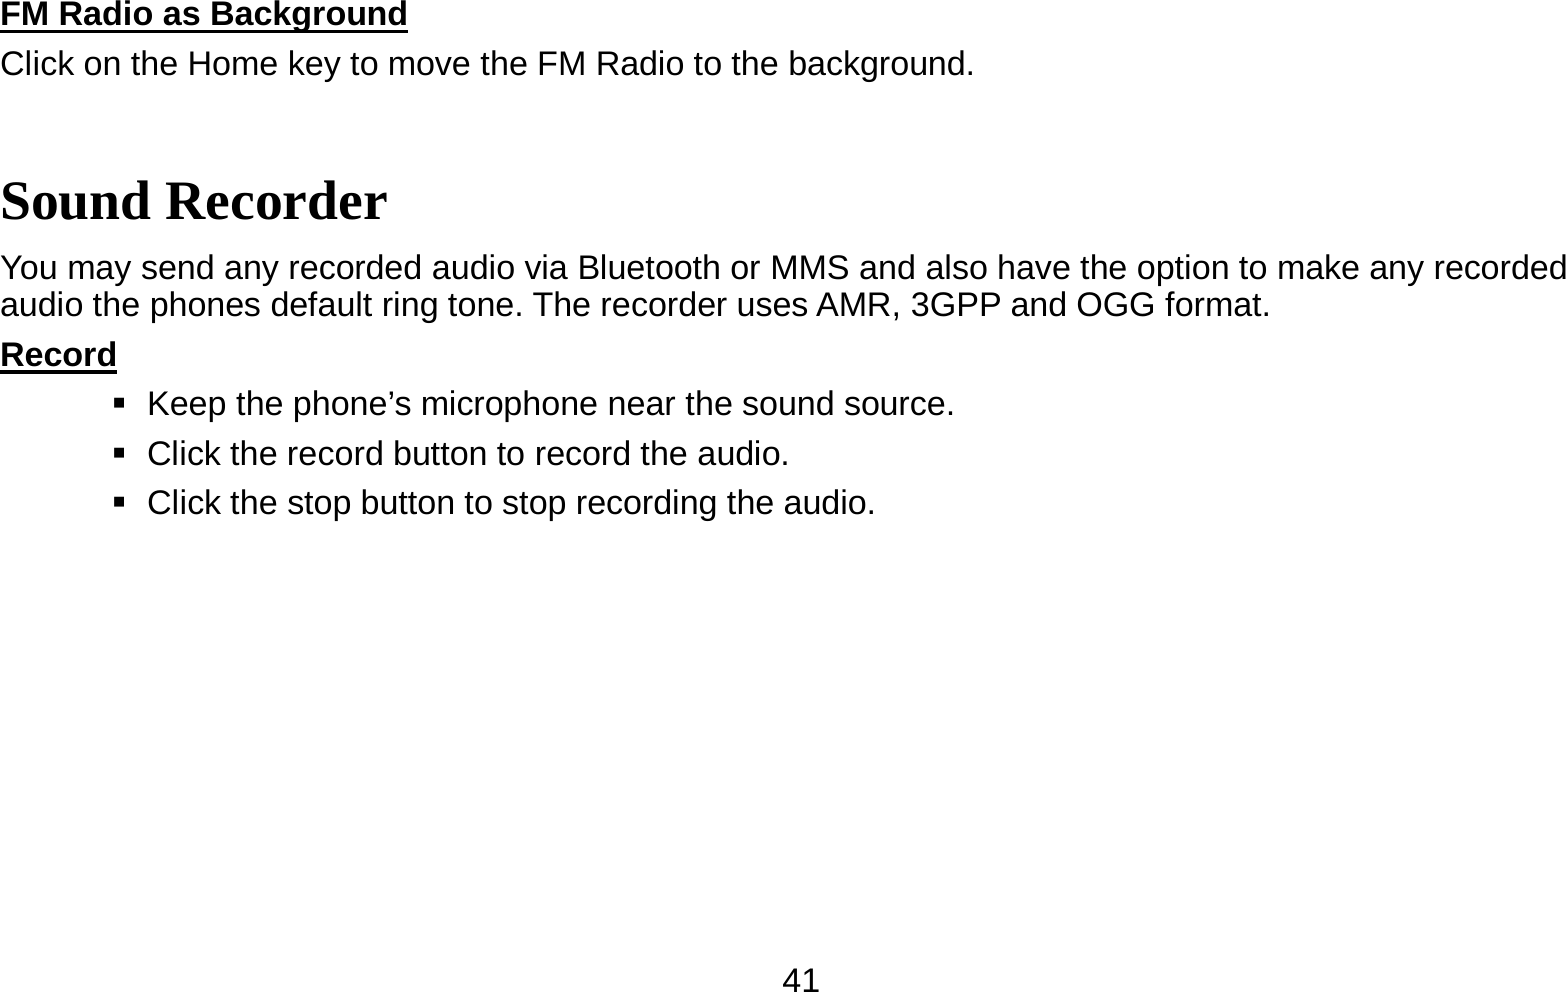   41FM Radio as Background                                                                          Click on the Home key to move the FM Radio to the background. Sound Recorder You may send any recorded audio via Bluetooth or MMS and also have the option to make any recorded audio the phones default ring tone. The recorder uses AMR, 3GPP and OGG format. Record                                                                                               Keep the phone’s microphone near the sound source.    Click the record button to record the audio.    Click the stop button to stop recording the audio. 